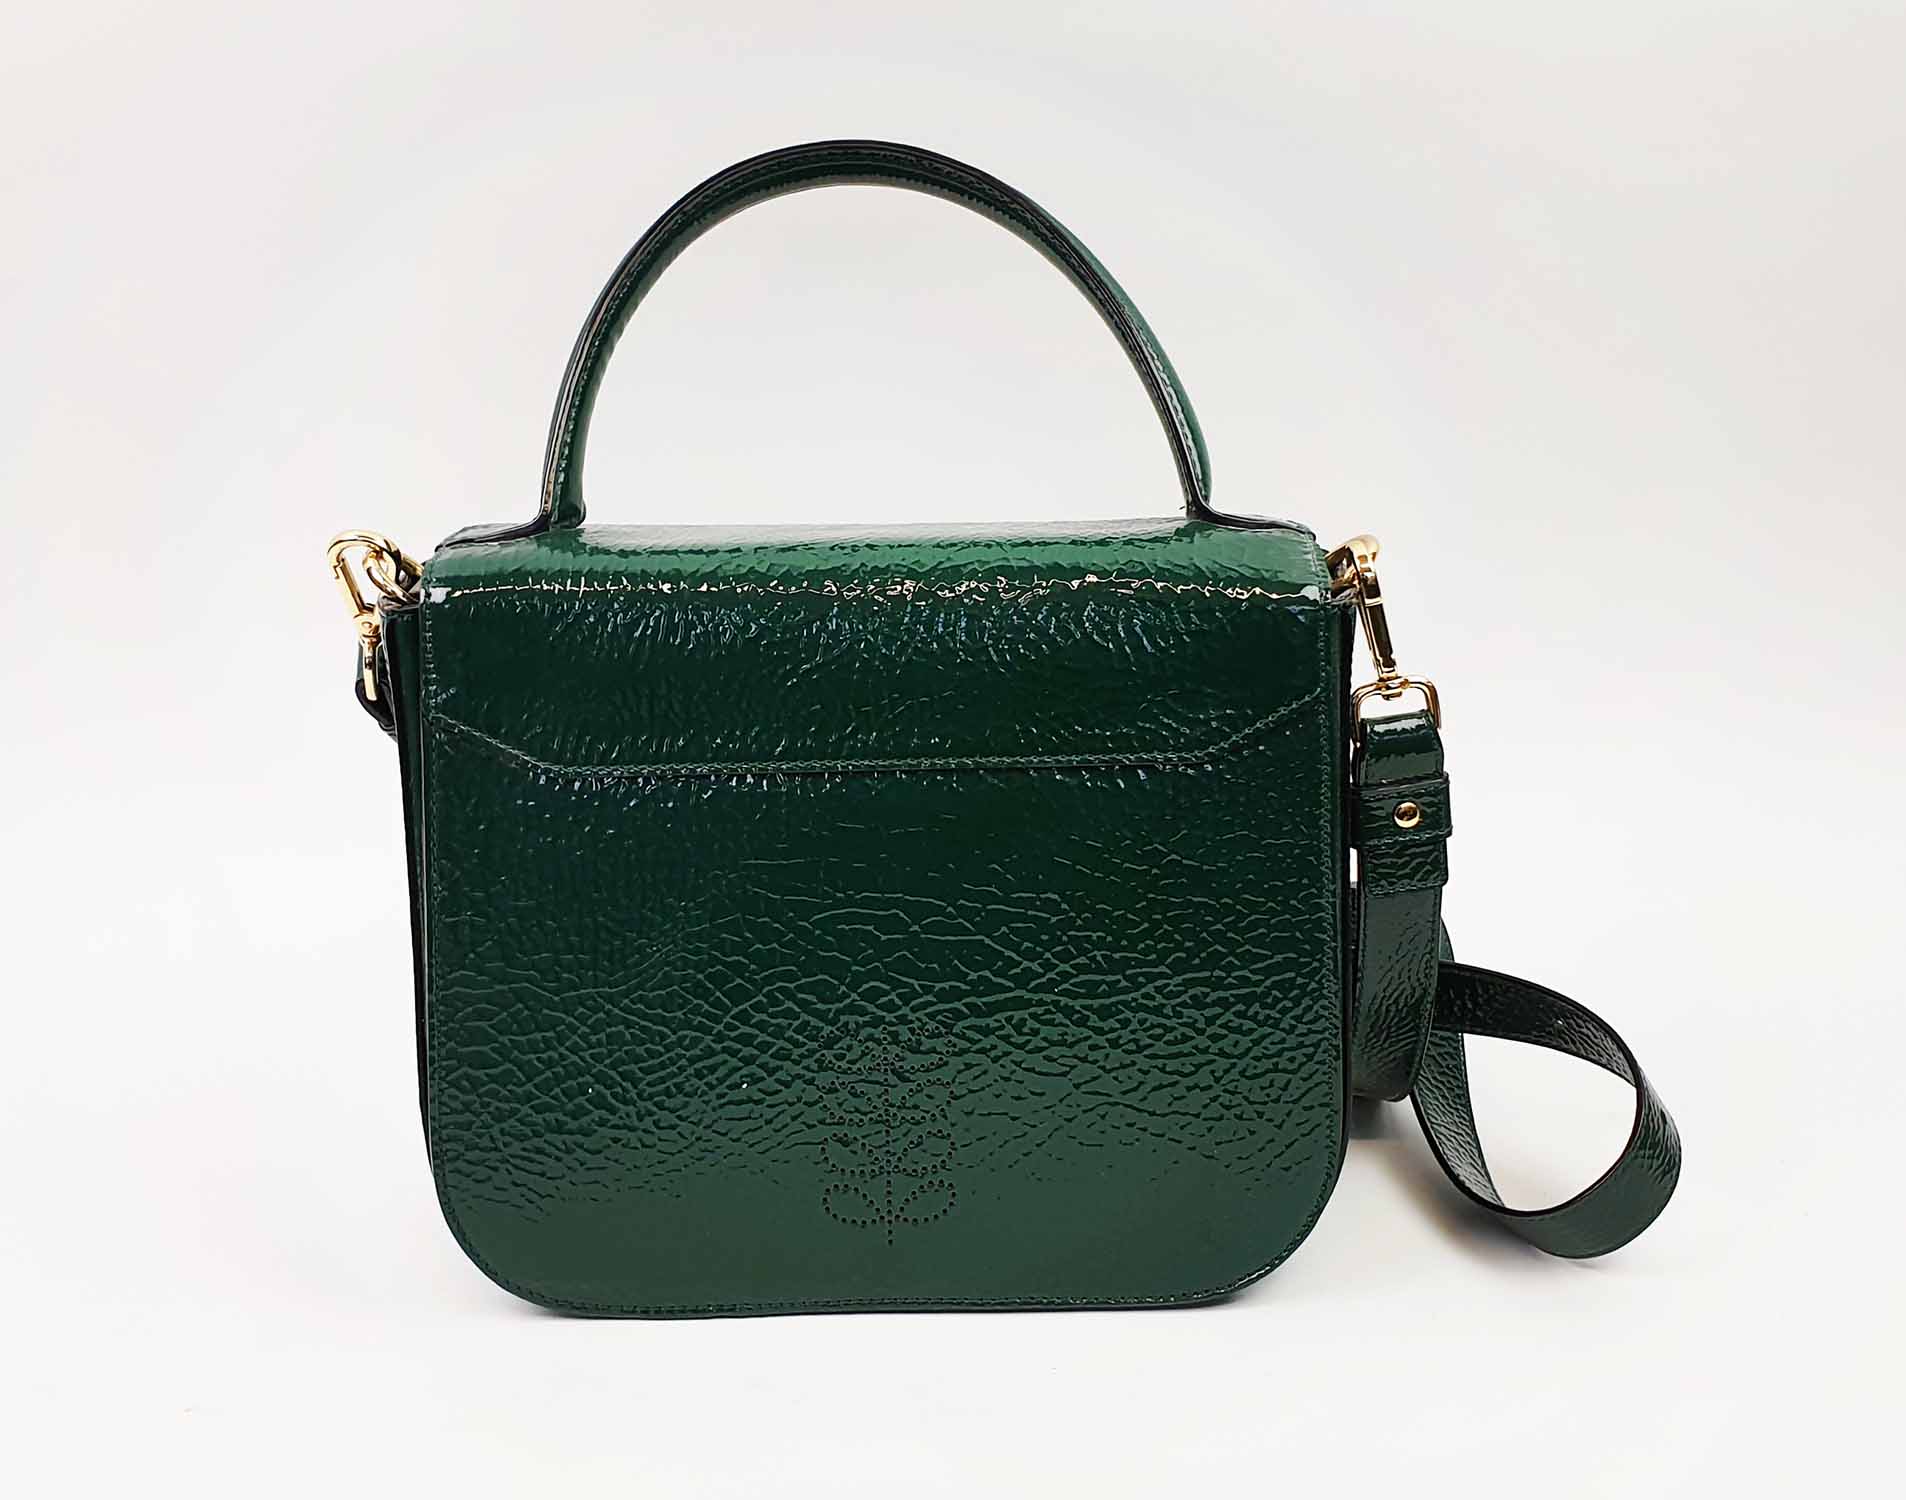 ORLA KIELY HANDBAG, patent green leather with snap front closure, fabric  lining and gold tone hardware 26cm x 22cm H x 11cm, together with matching  necklace and brooch, plus a Moschino zippered